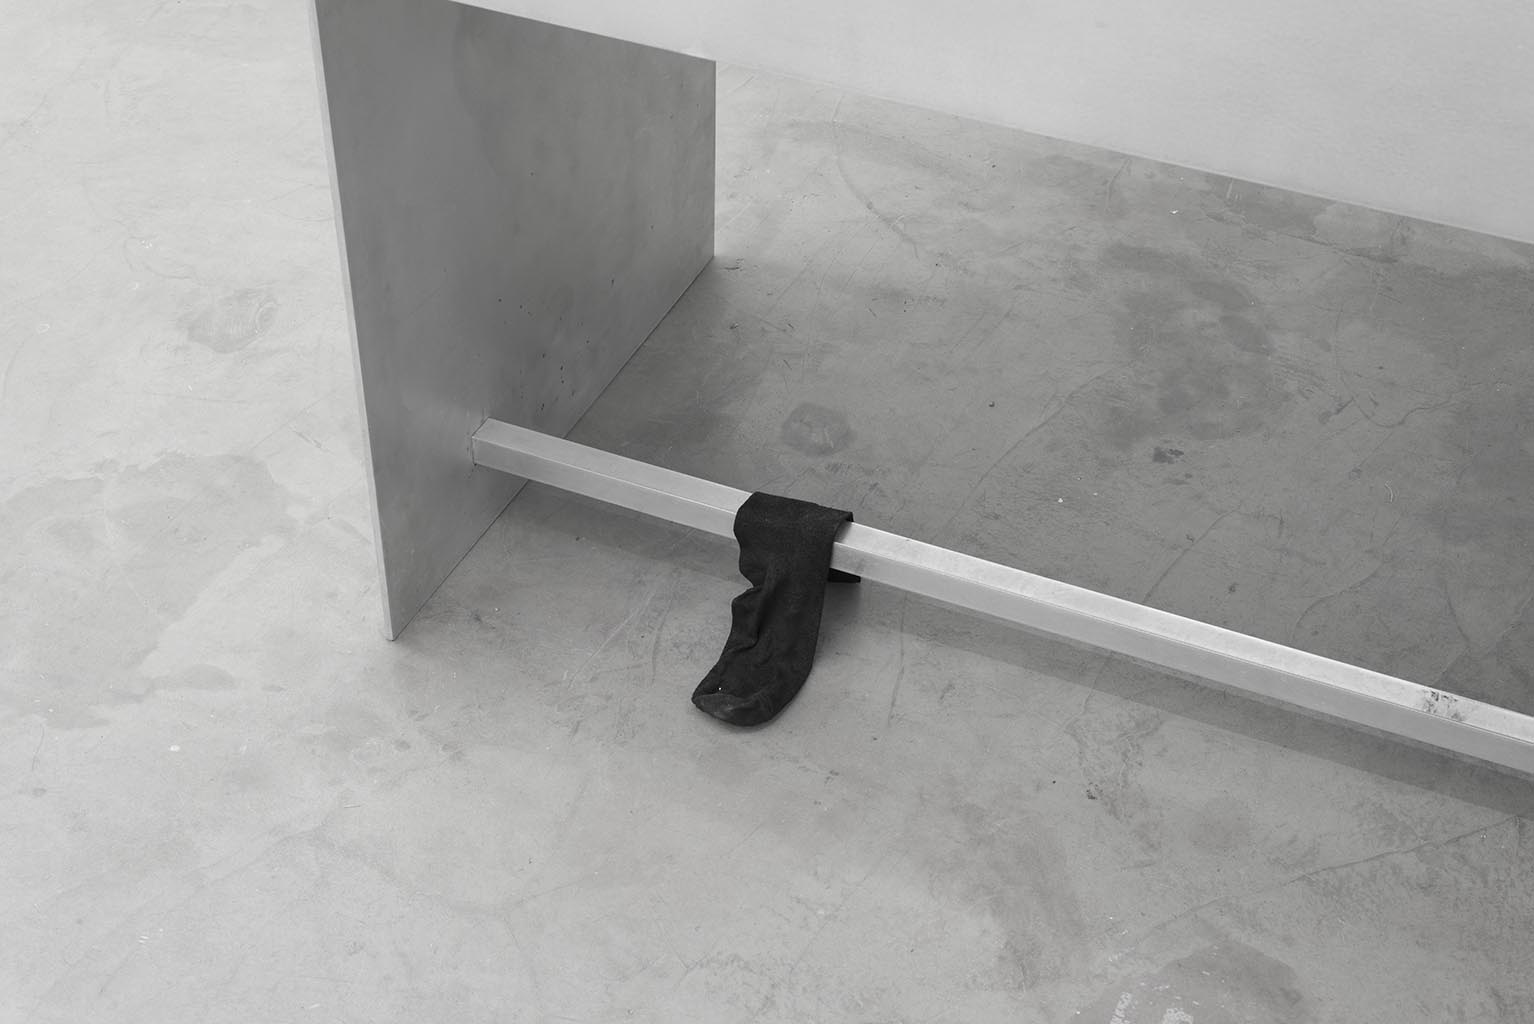 Pile, 2015, gesso, acrylic paint, fabric stiffener,dress socks, dimensions variable